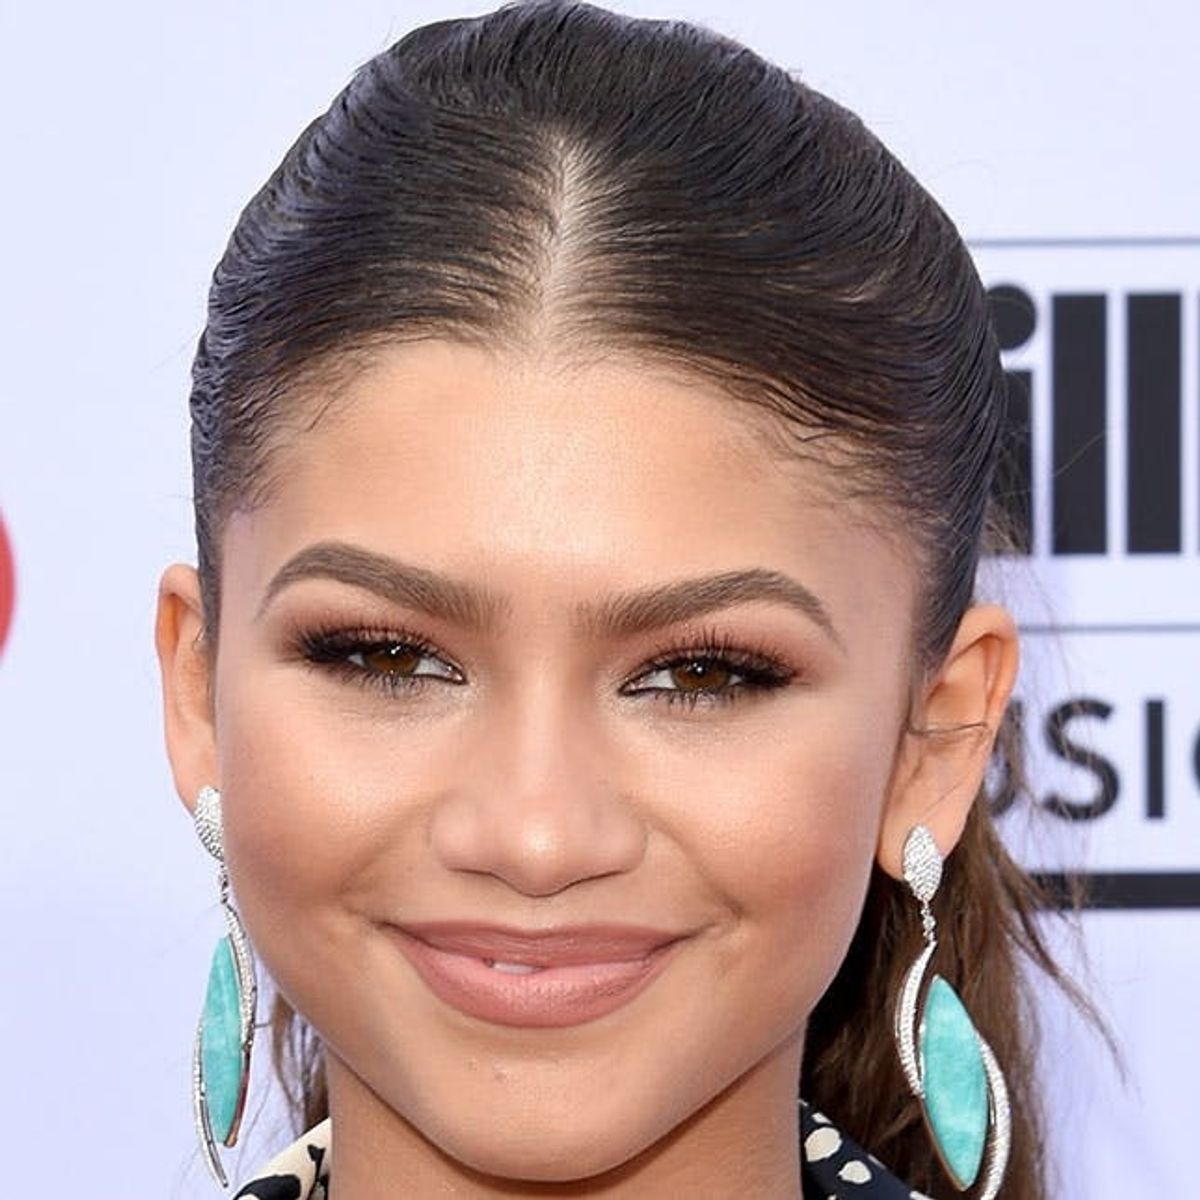 Zendaya’s New Shoe Line Is as Awesome as She Is